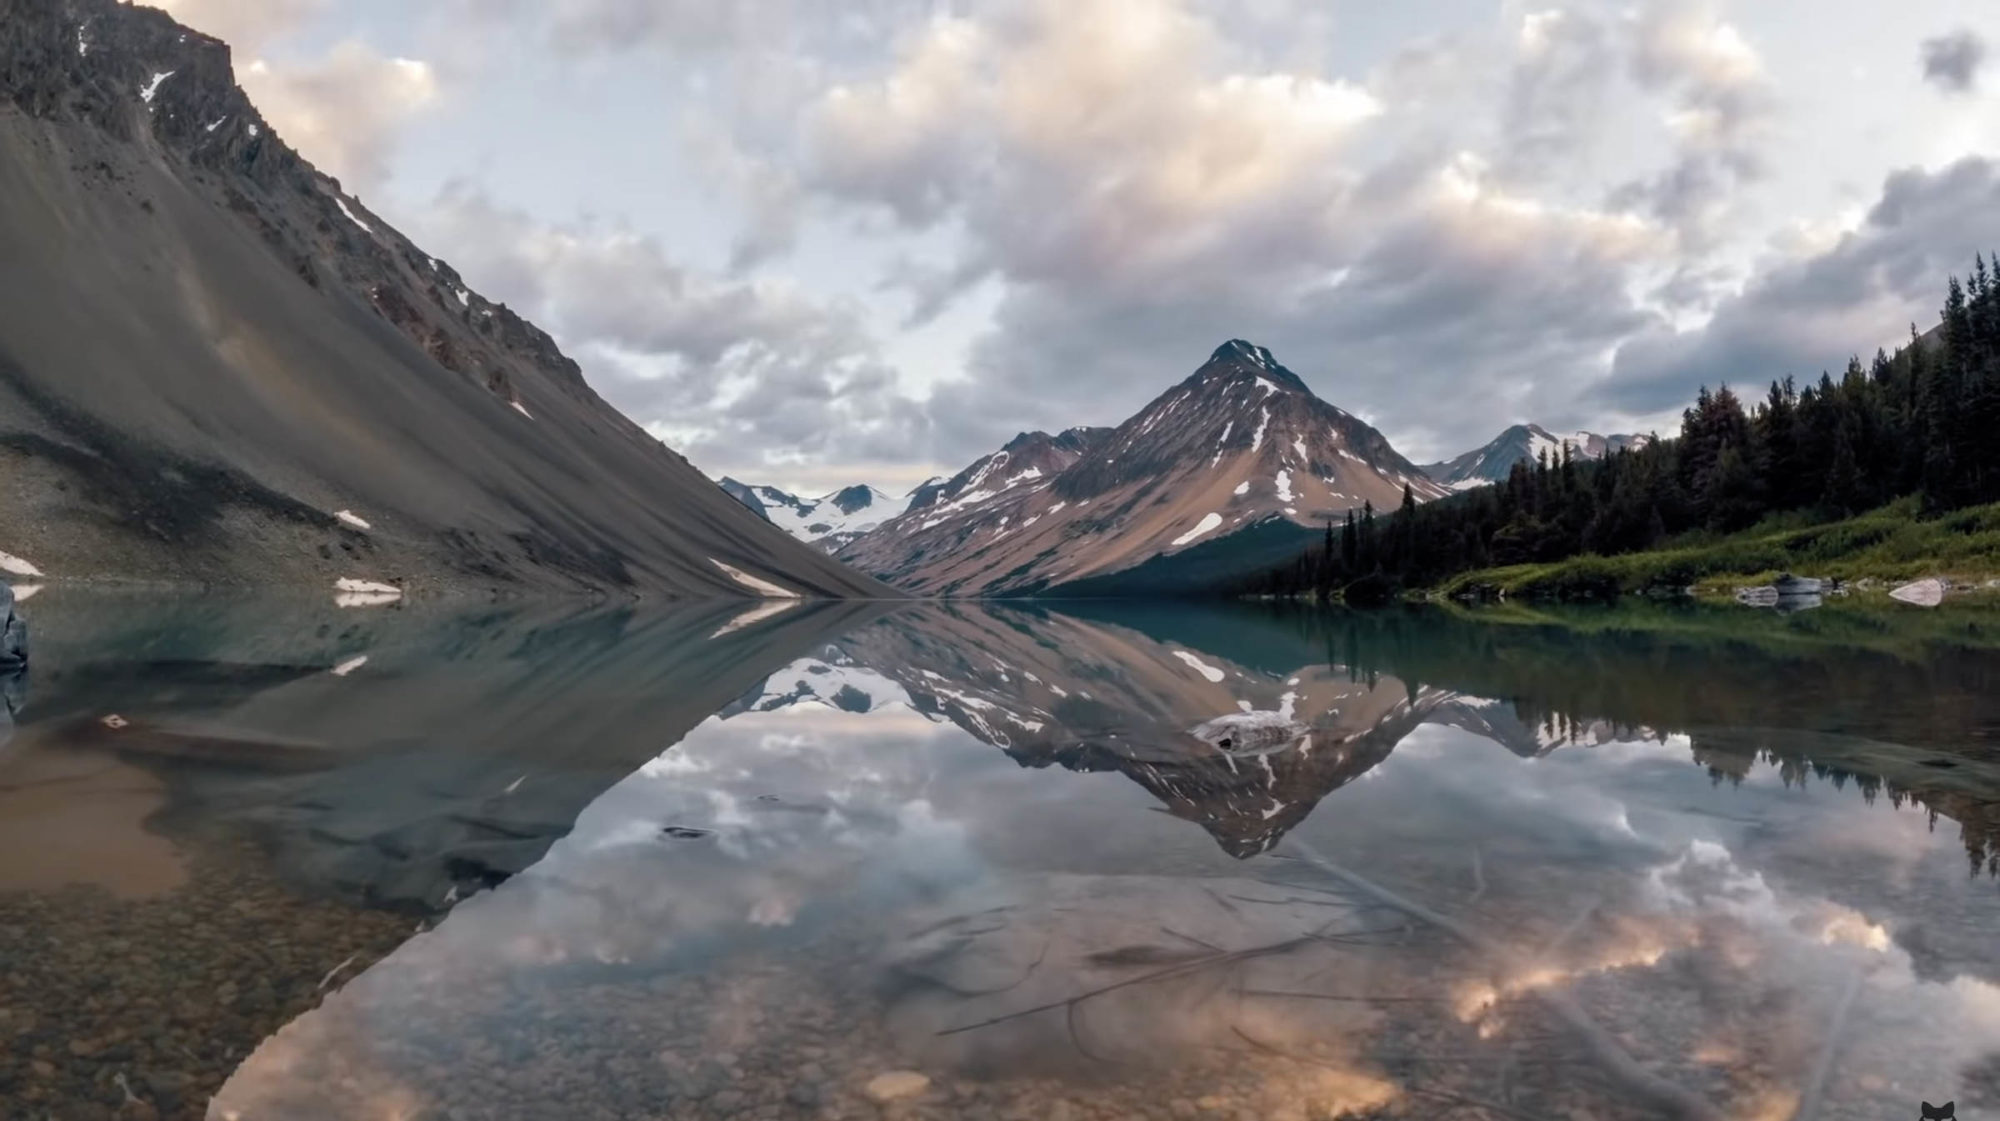 Hawgin The Chilcotins video, Margus Riga, Kenny Smith